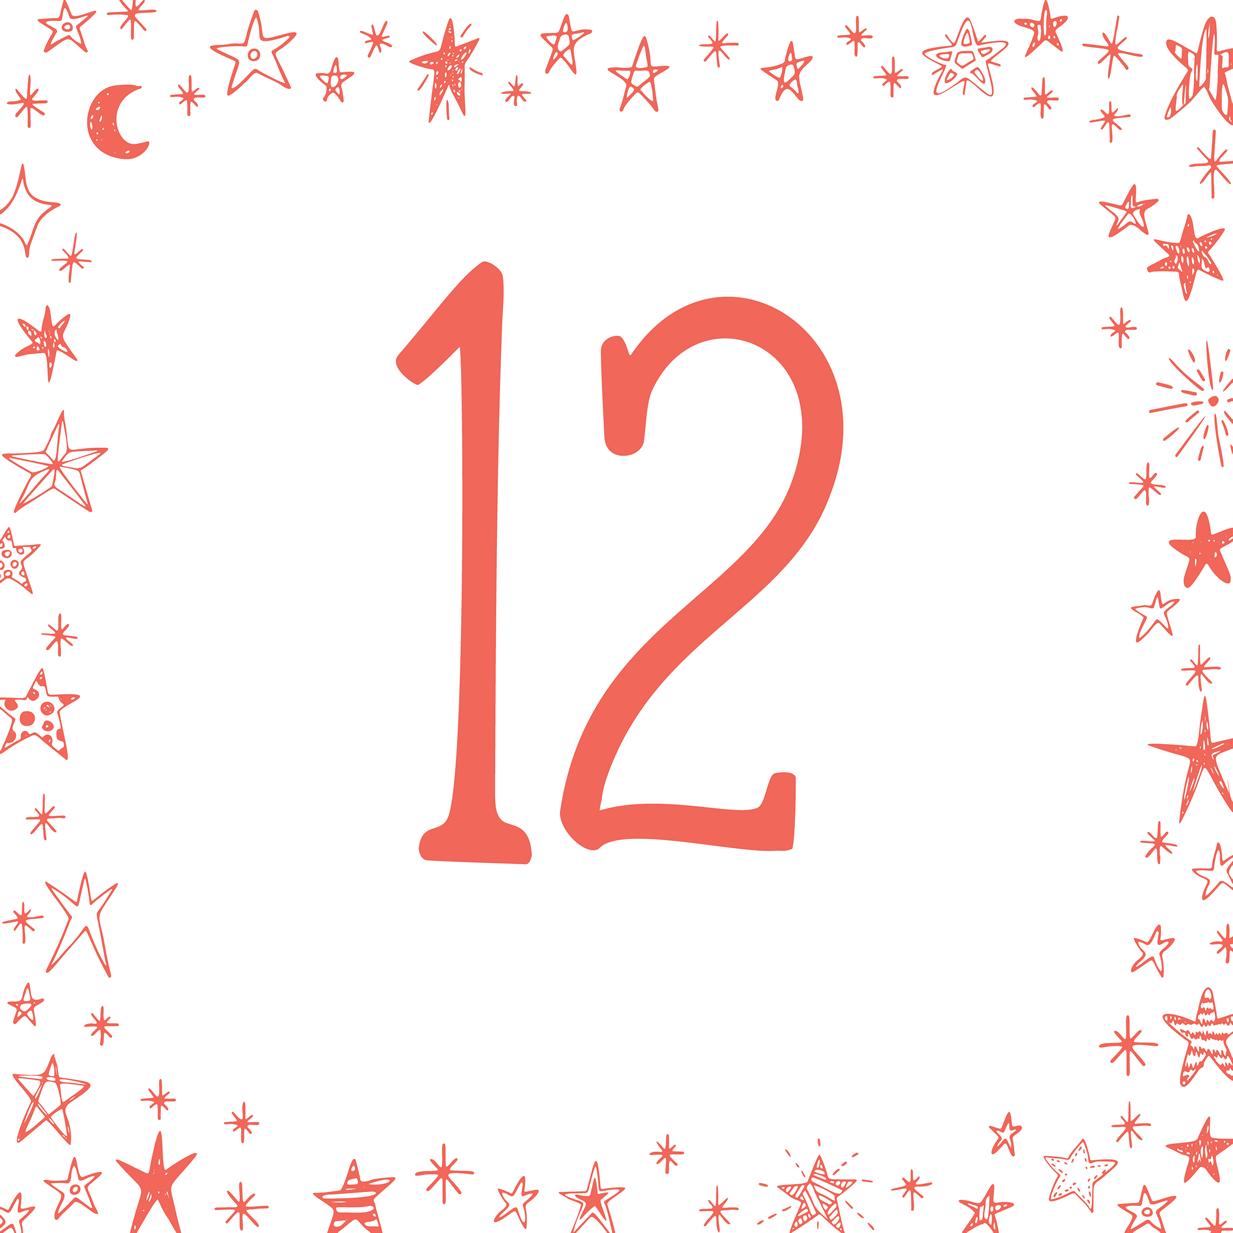 Image name yorkshire advent calendar 2022 day 12 the 5 image from the post Day 12 - Christmas 2022 in Yorkshire.com.